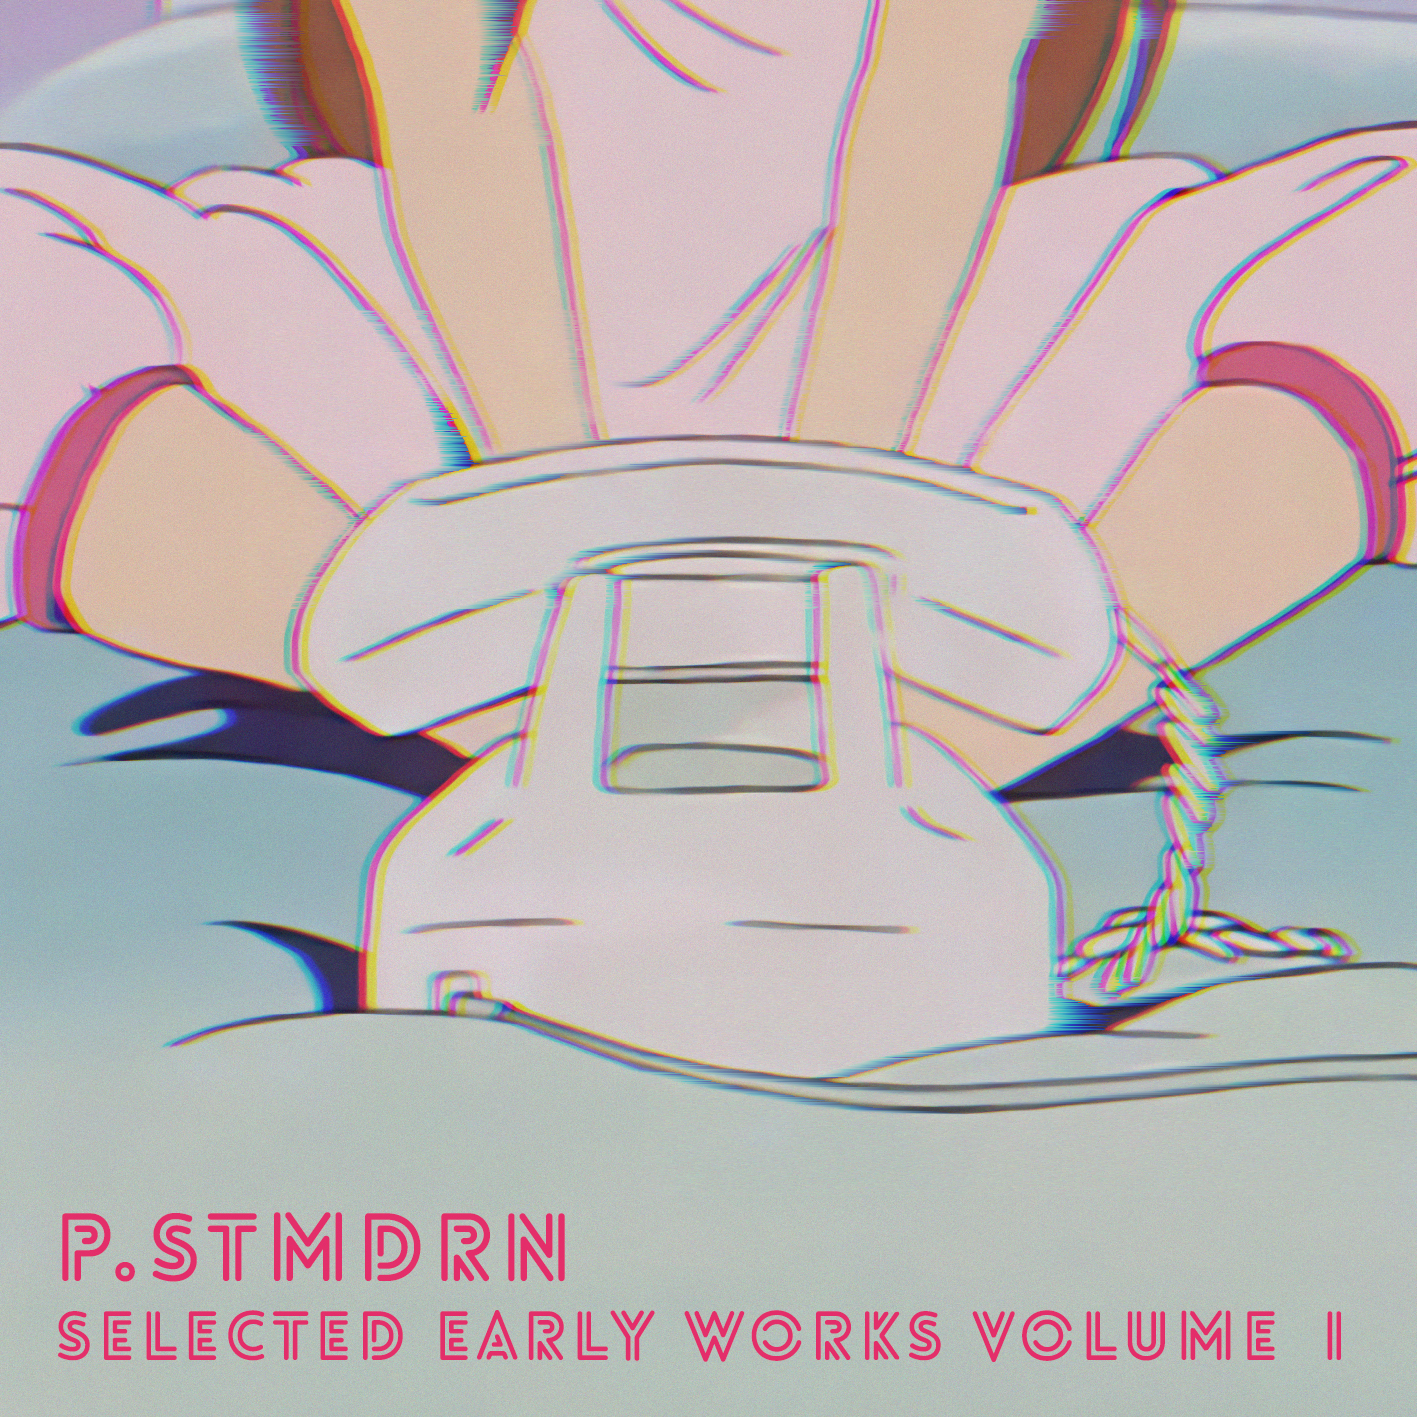 p.stmdrn – selected early works volume I